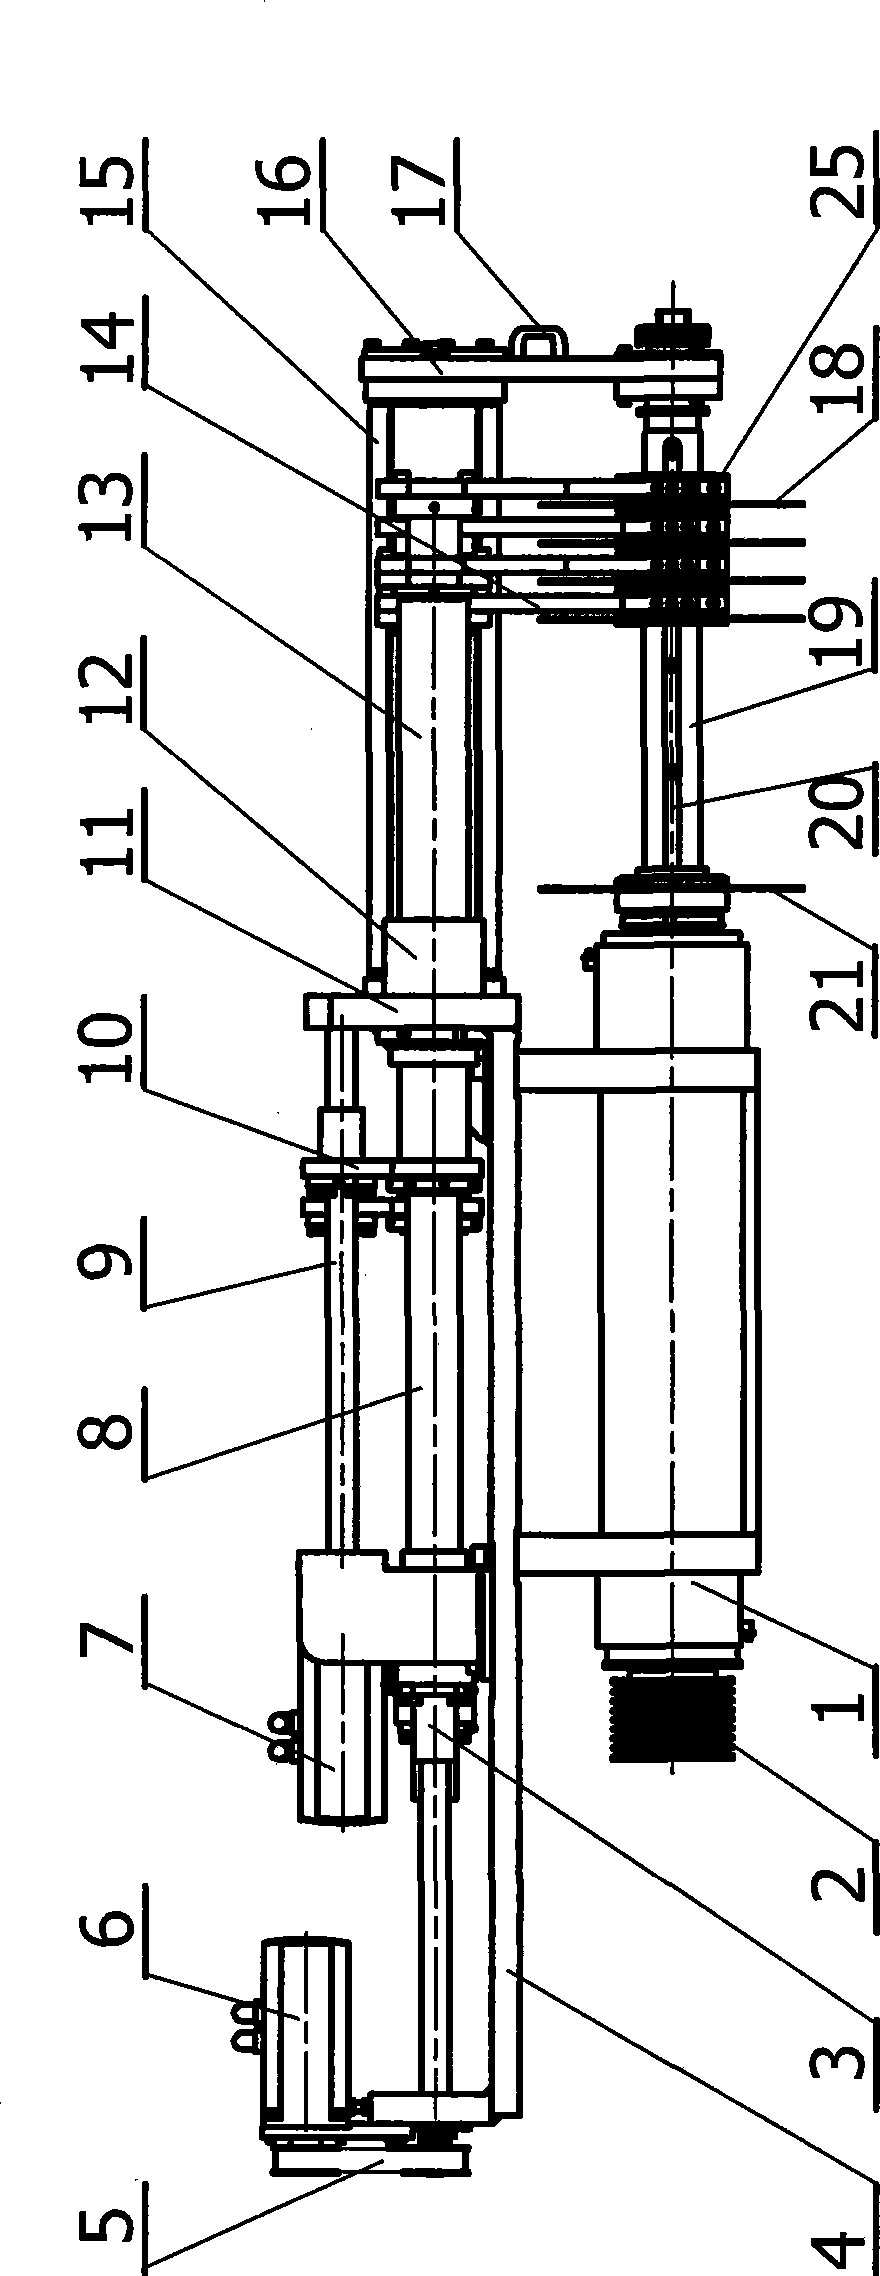 Mandrel structure of circular saw machine for preferably cutting timber in longitudinal direction